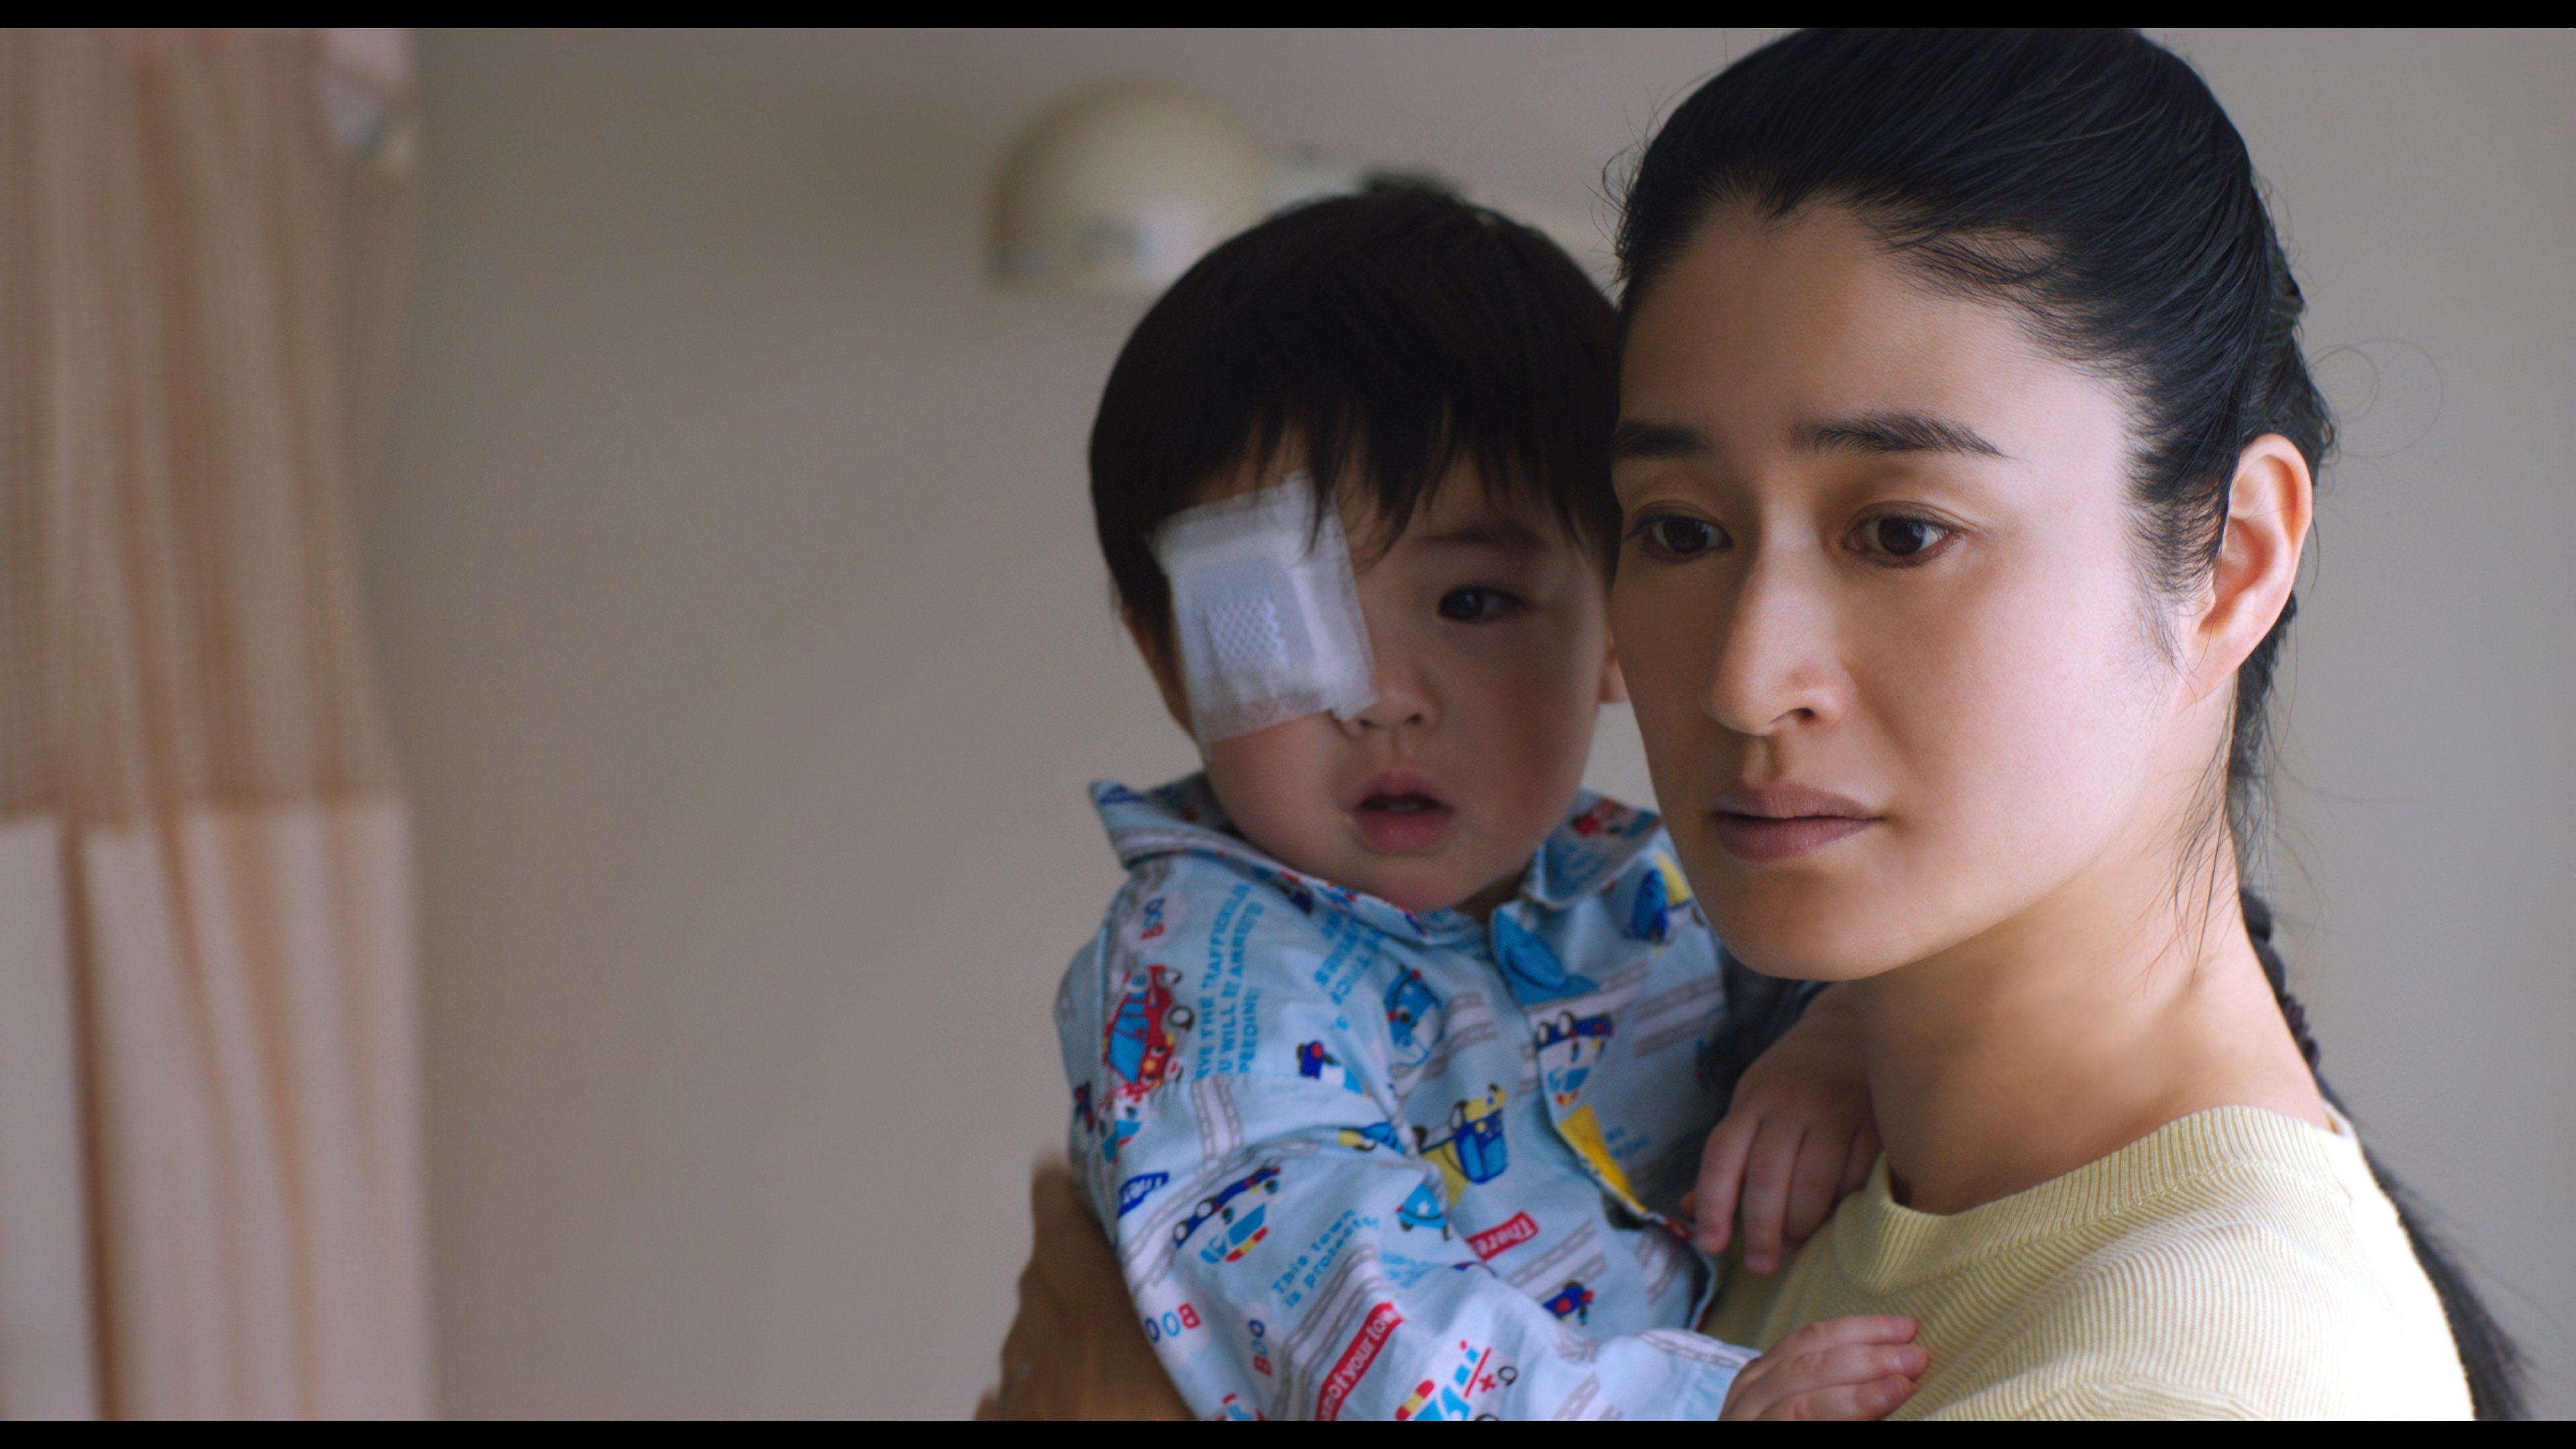 Koyuki (right) in a still from “A Mother’s Touch”.